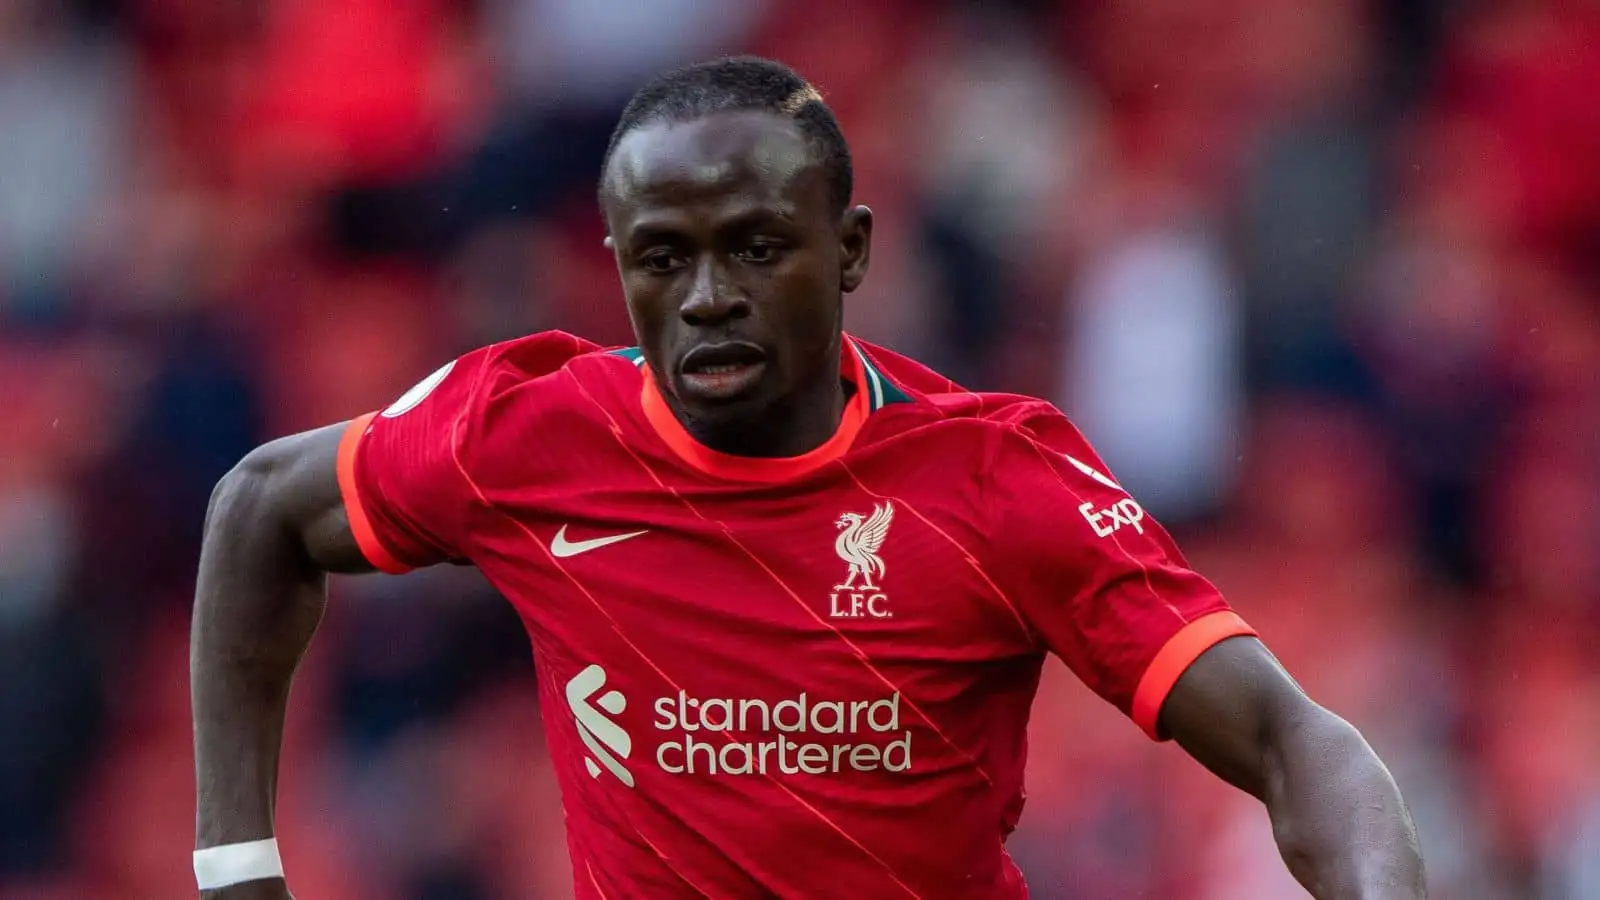 Sadio Mane of Liverpool during the Premier League match between Liverpool and Crystal Palace at Anfield on May 23, 2021